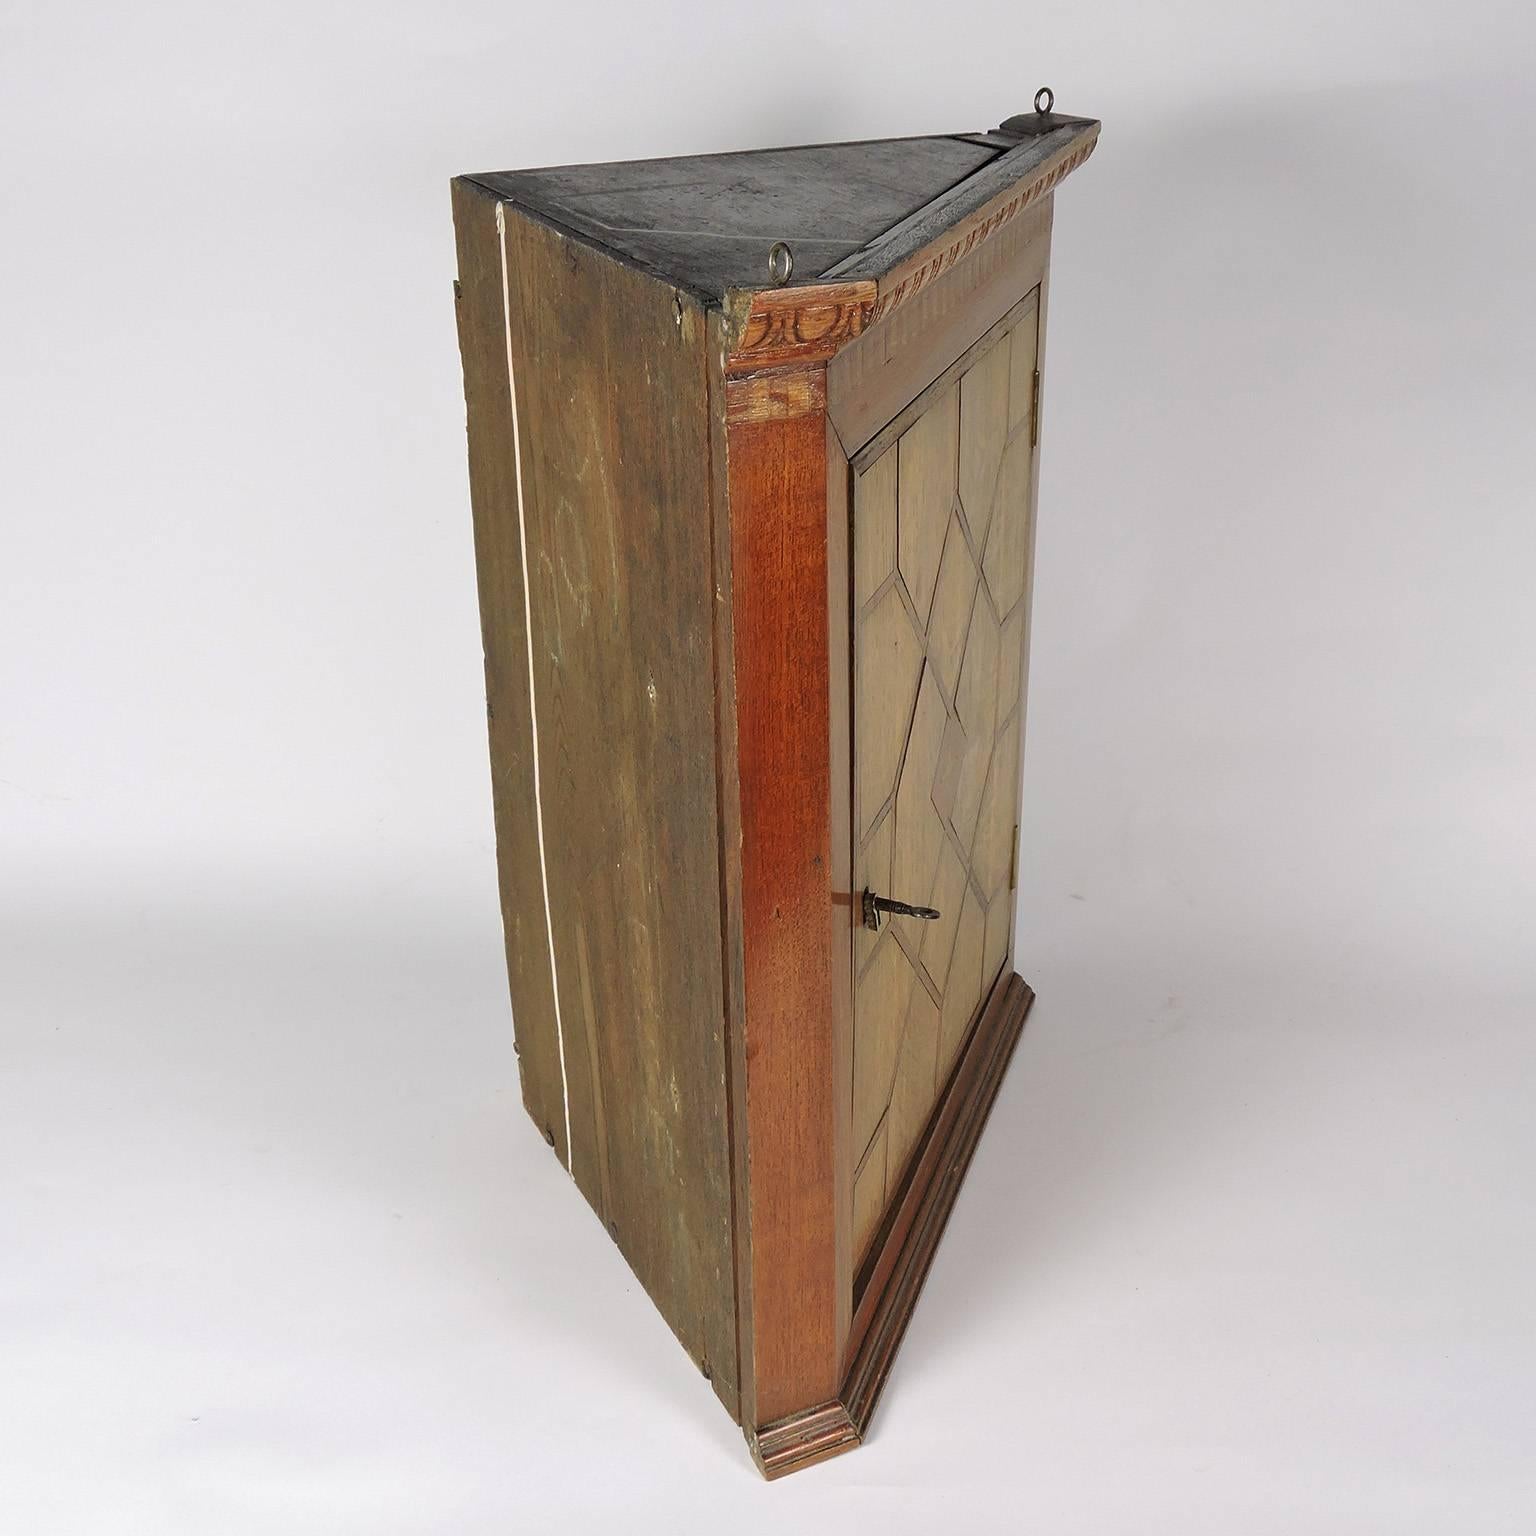 British 19th Century Georgian Oak and Parquetry Fruitwood Inlaid Hanging Corner Cabinet For Sale